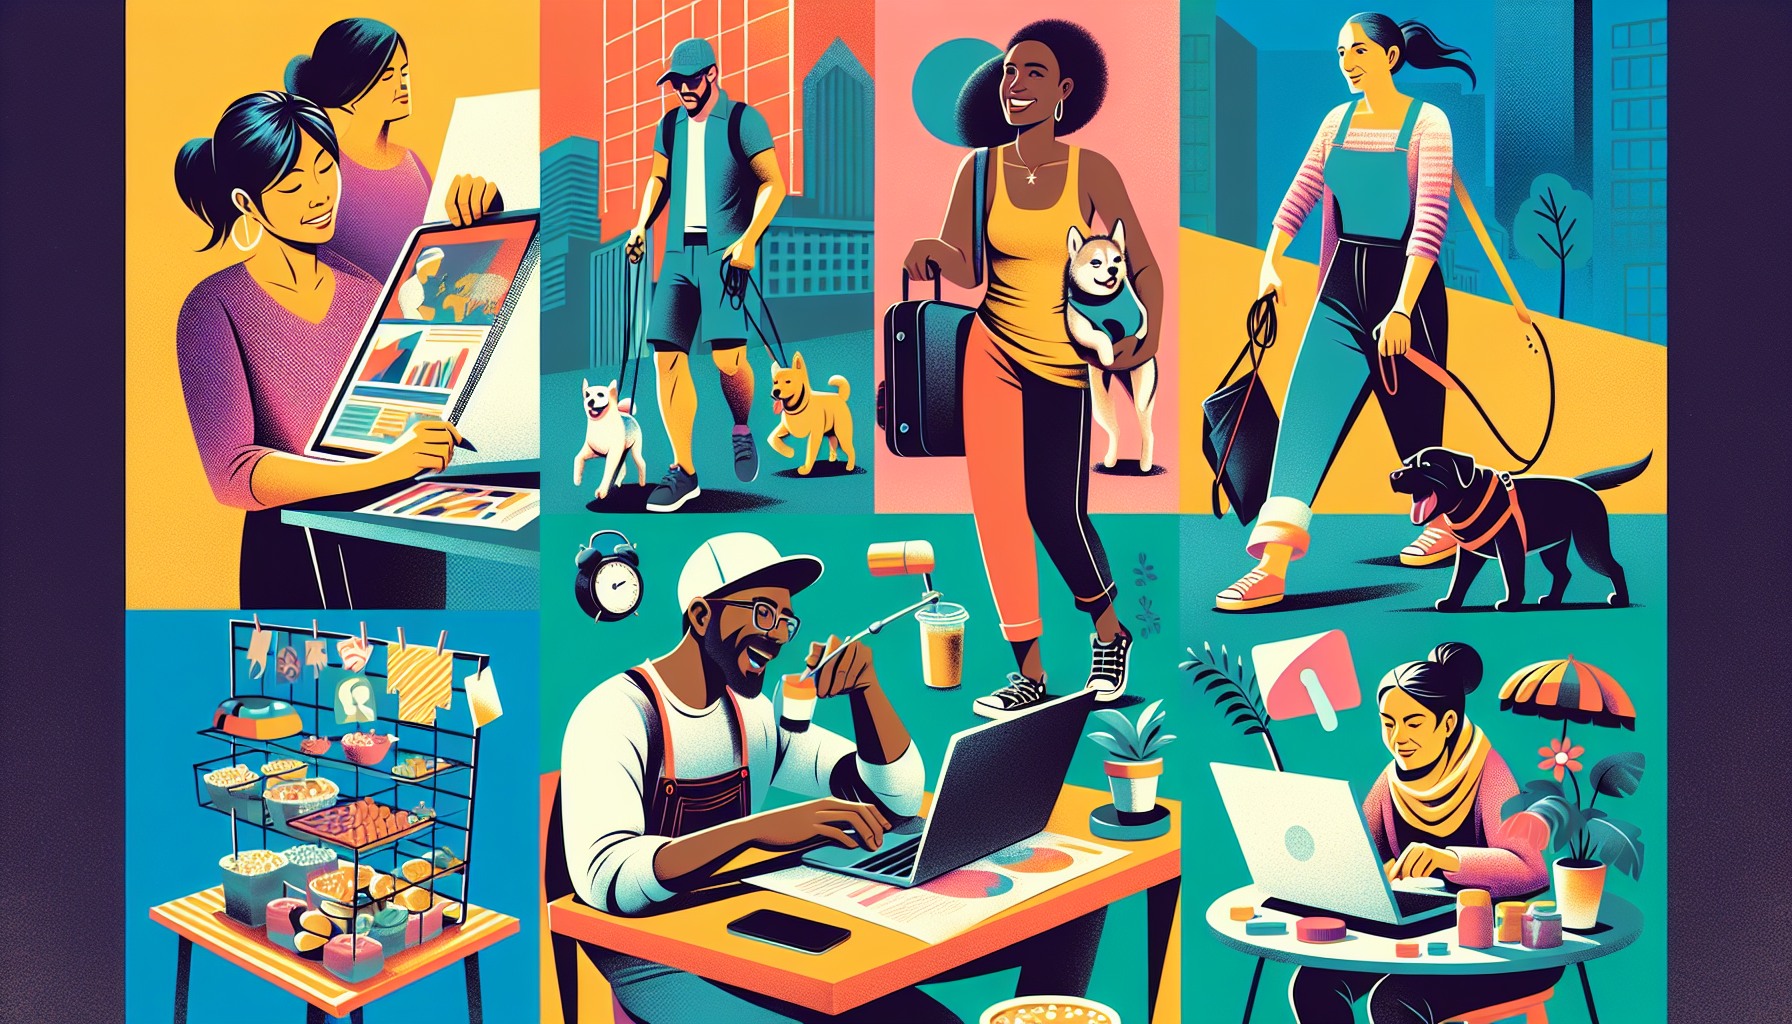 Create an image that showcases a vibrant, bustling scene with individuals engaged in various side hustle activities. Display a diverse range of endeavors such as dog walking, freelance writing, online